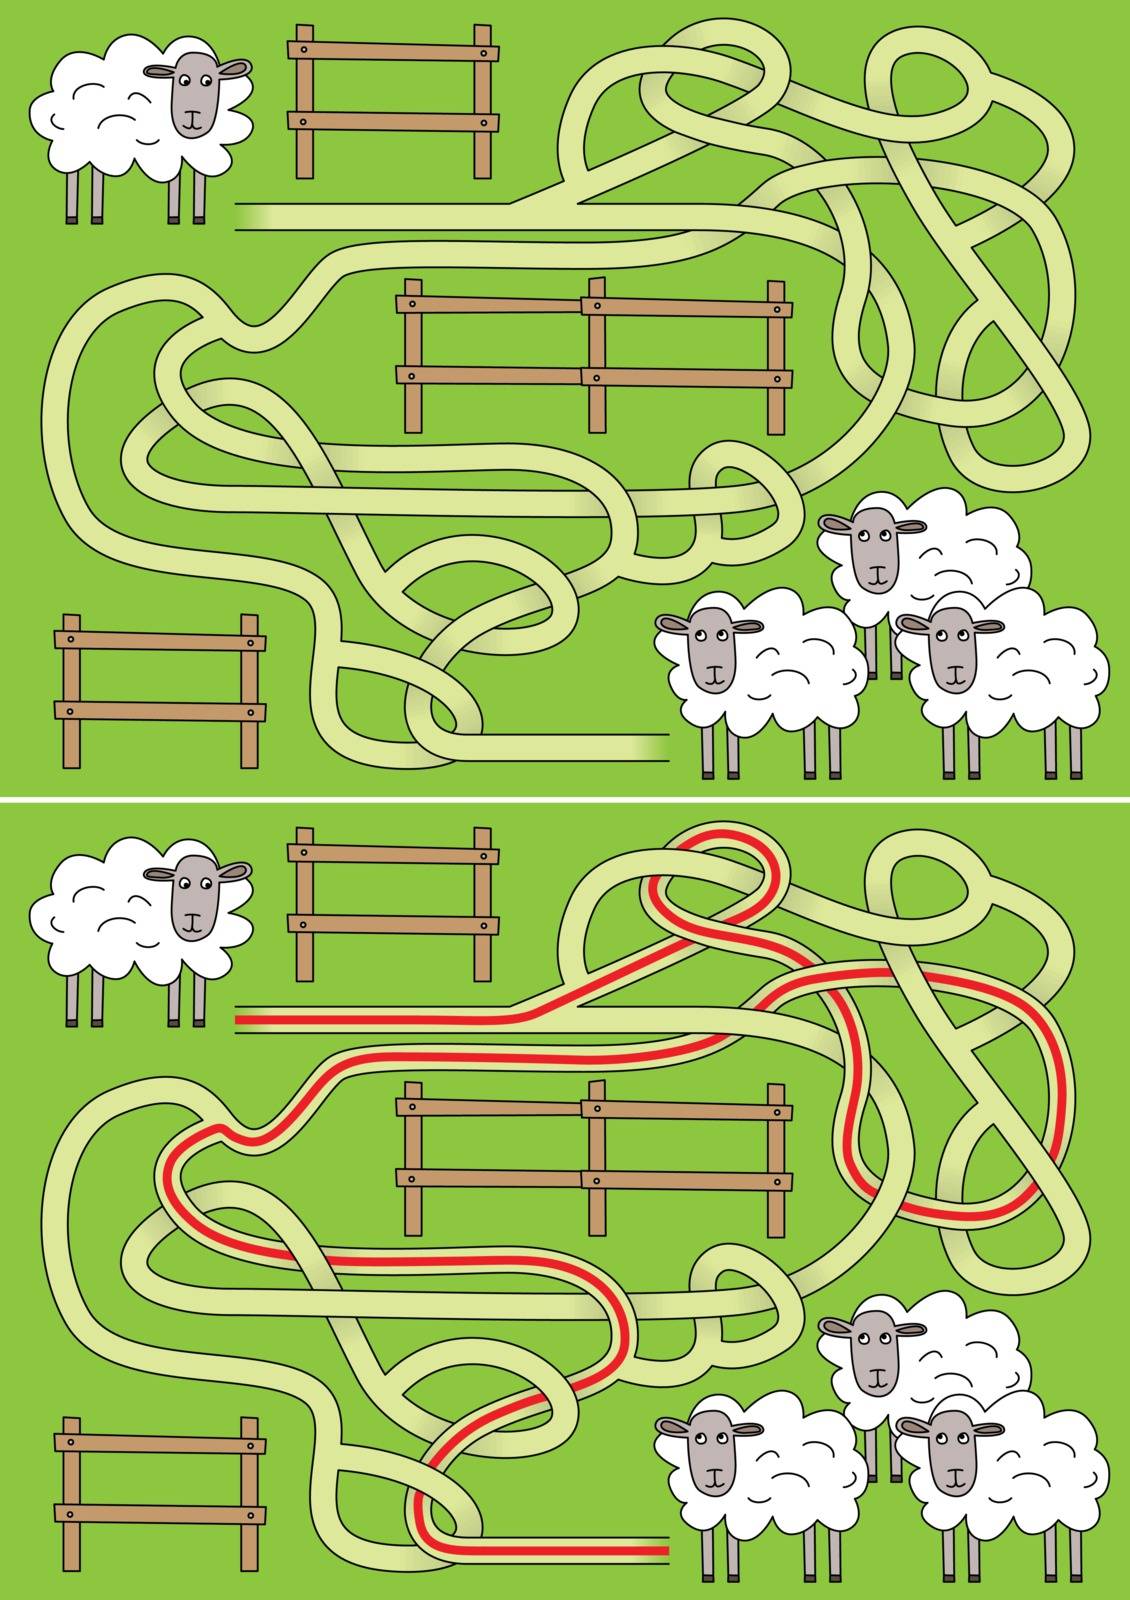 Sheep maze for kids with a solution